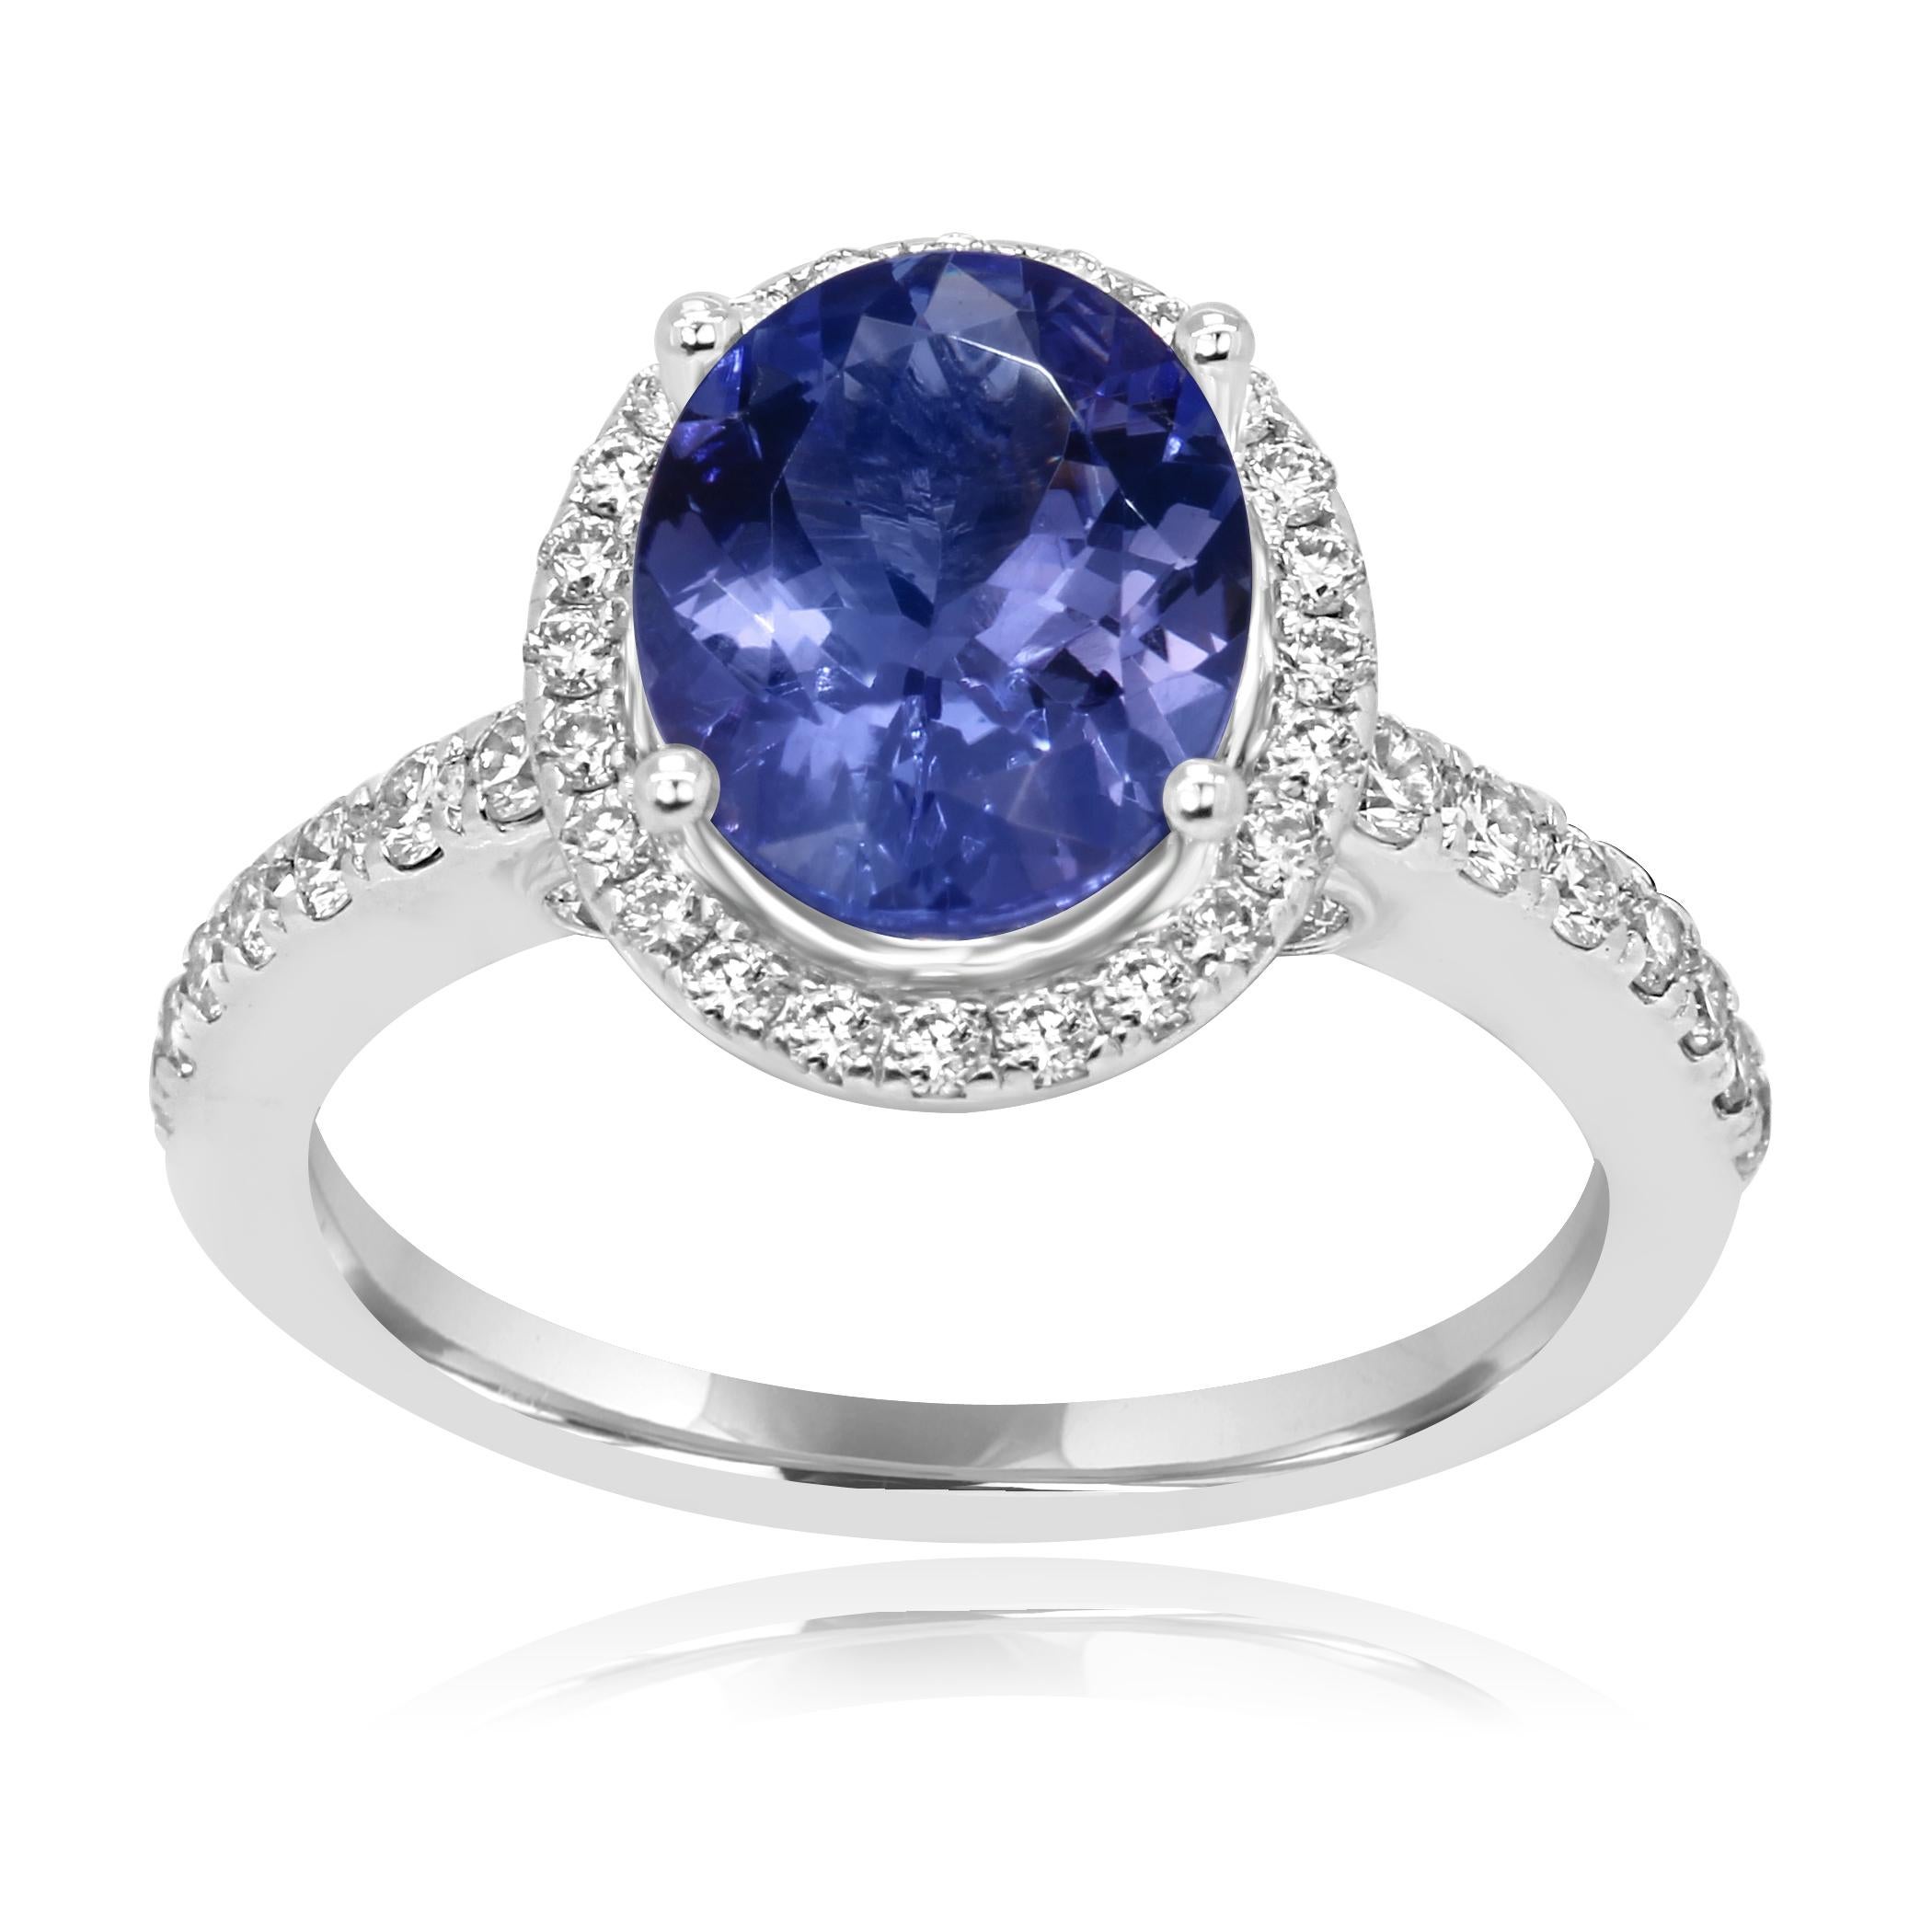 Tanzanite Oval 2.29 Carat Encircled in a Halo of White Round Diamonds 0.34 Carat in 14K White Gold always in style classic Fashion Bridal or Cocktail Ring.

Style available in different price ranges. Prices are based on your selection of 4C's Cut,